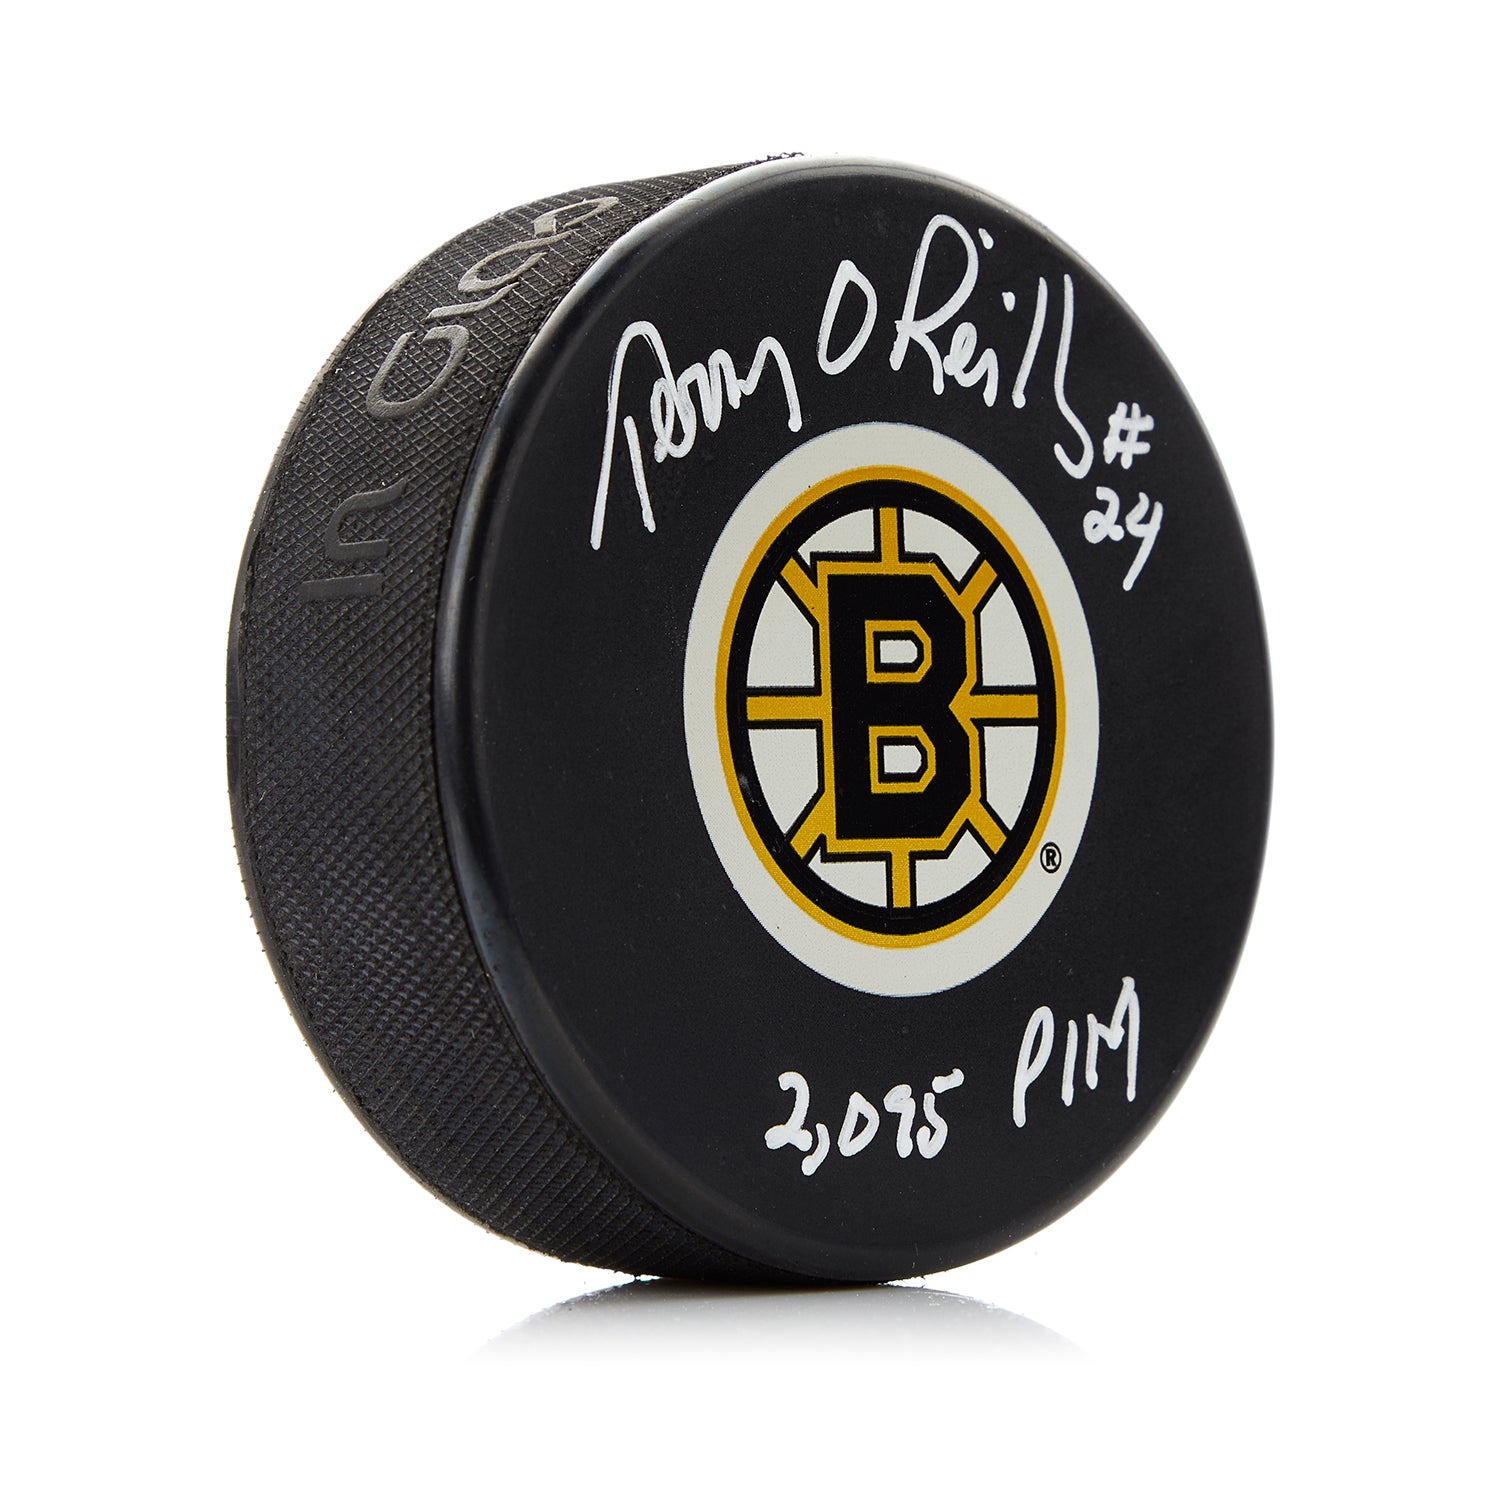 Terry O'Reilly Signed Boston Bruins Hockey Puck with 2095 PIM Note